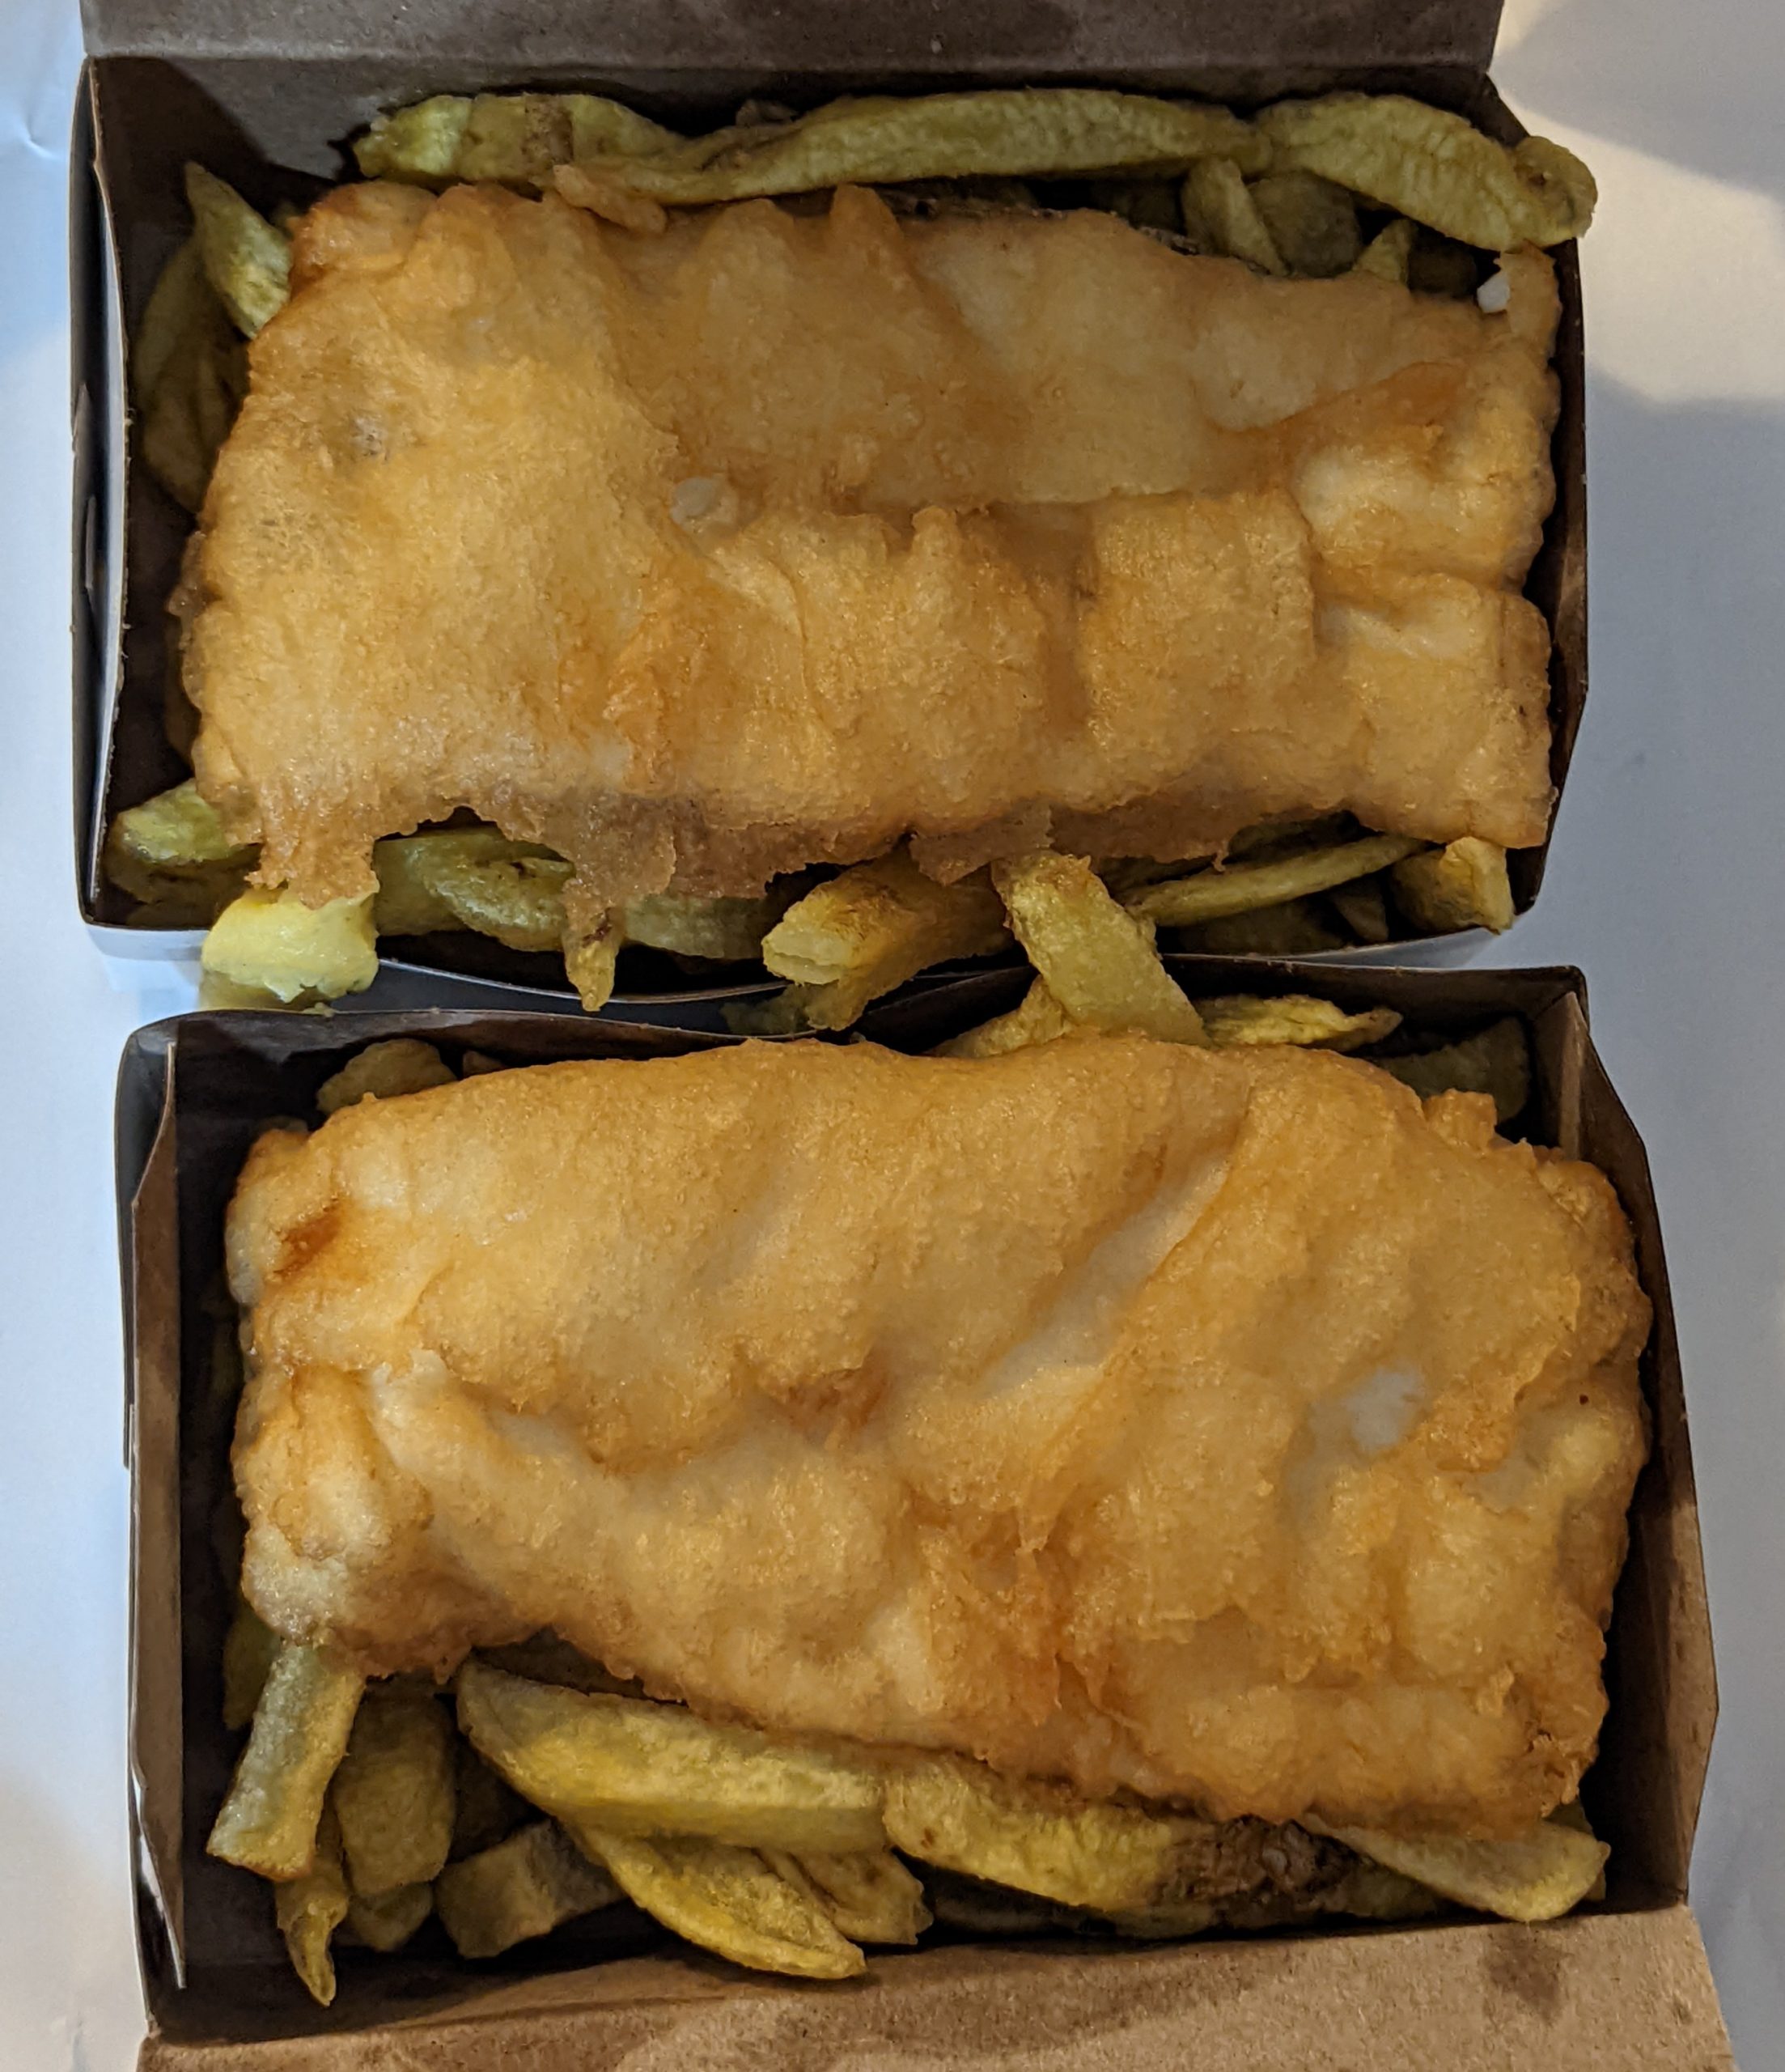 Duckworth’s Fish and Chips